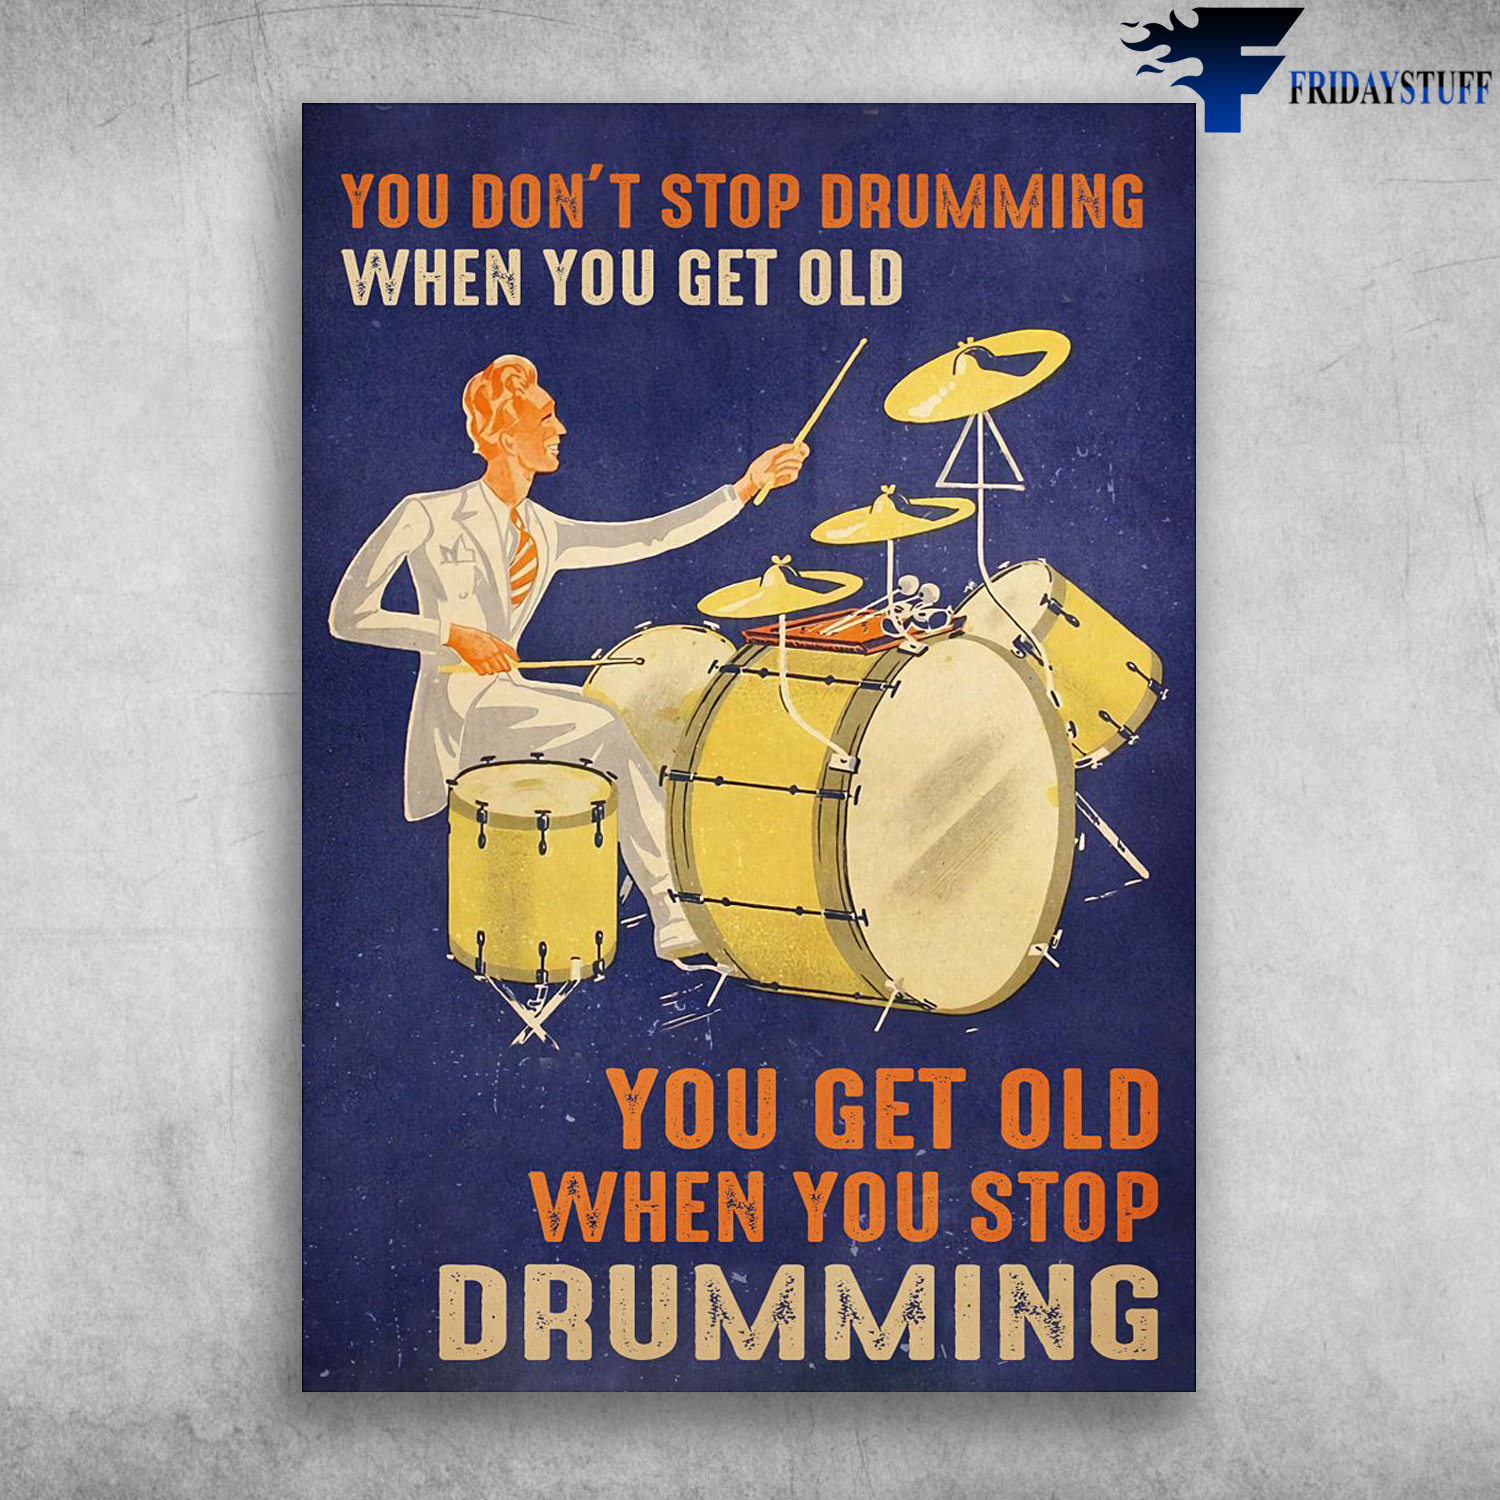 Drum Man - You Don't Stop Drumming When You Get Old, You Get Old When You Stop Drumming